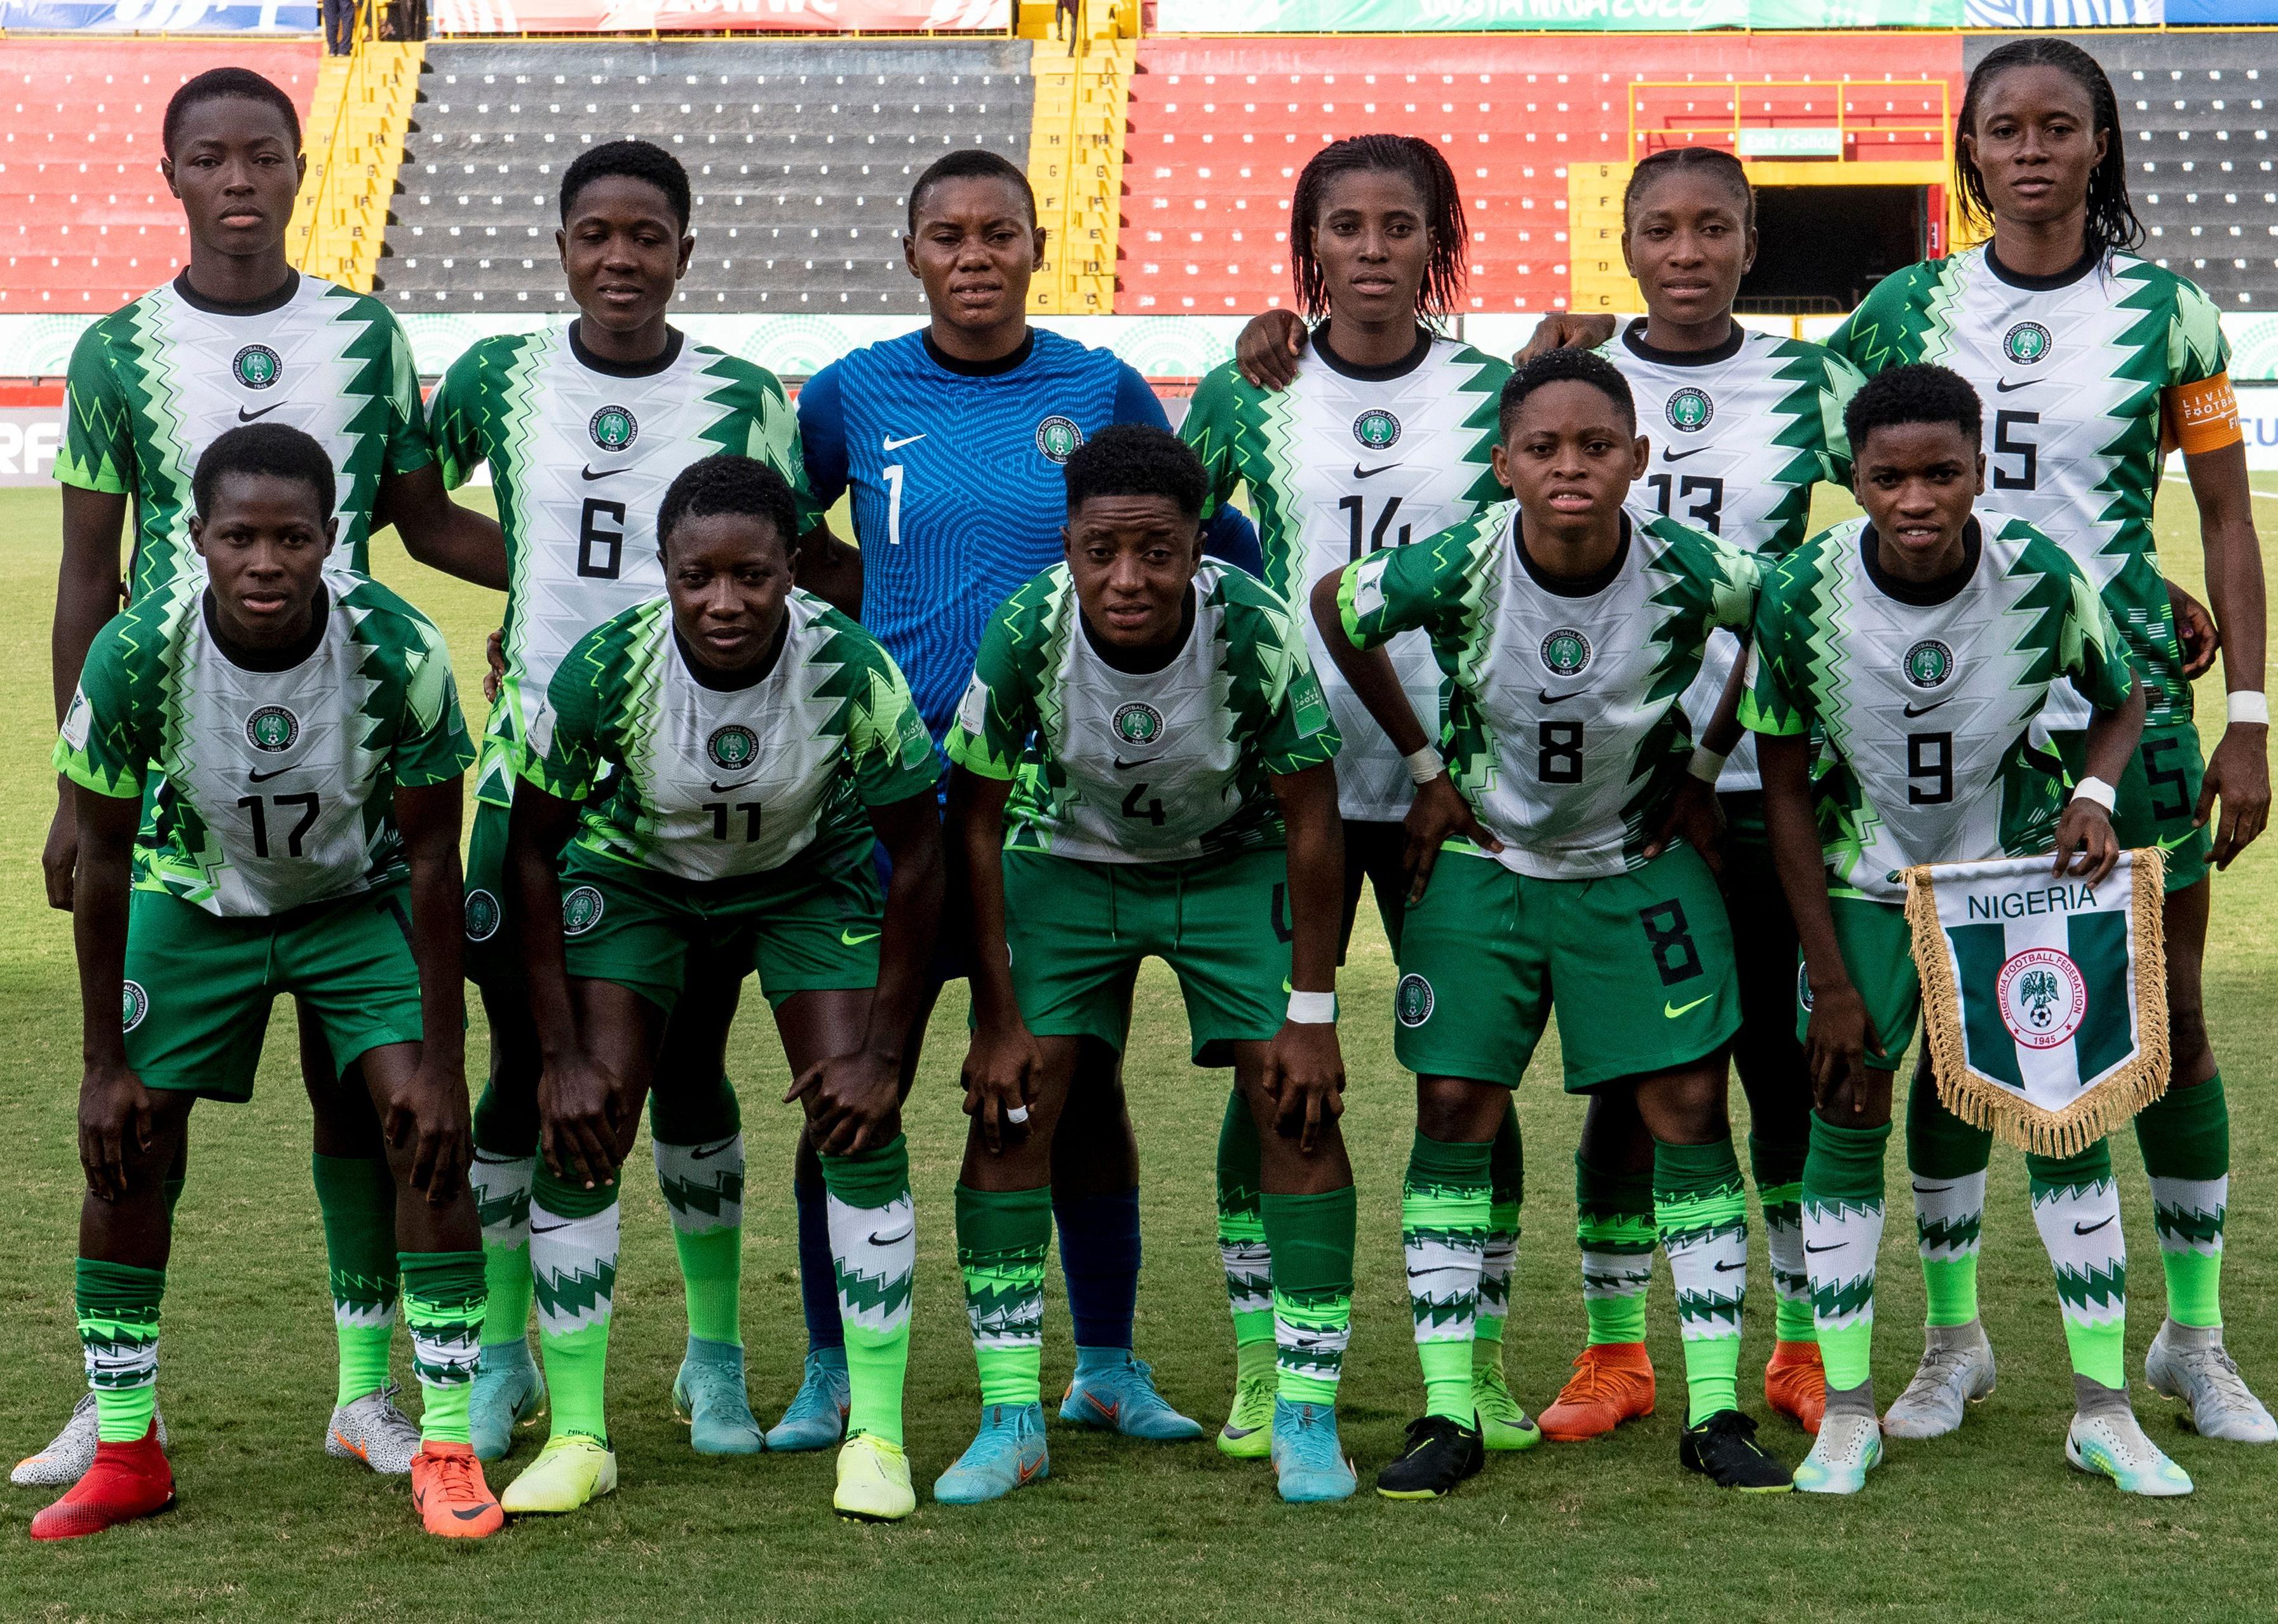 Nigerian players pose for a picture before their Women's U-20 World Cup quarter final match against Netherlands.